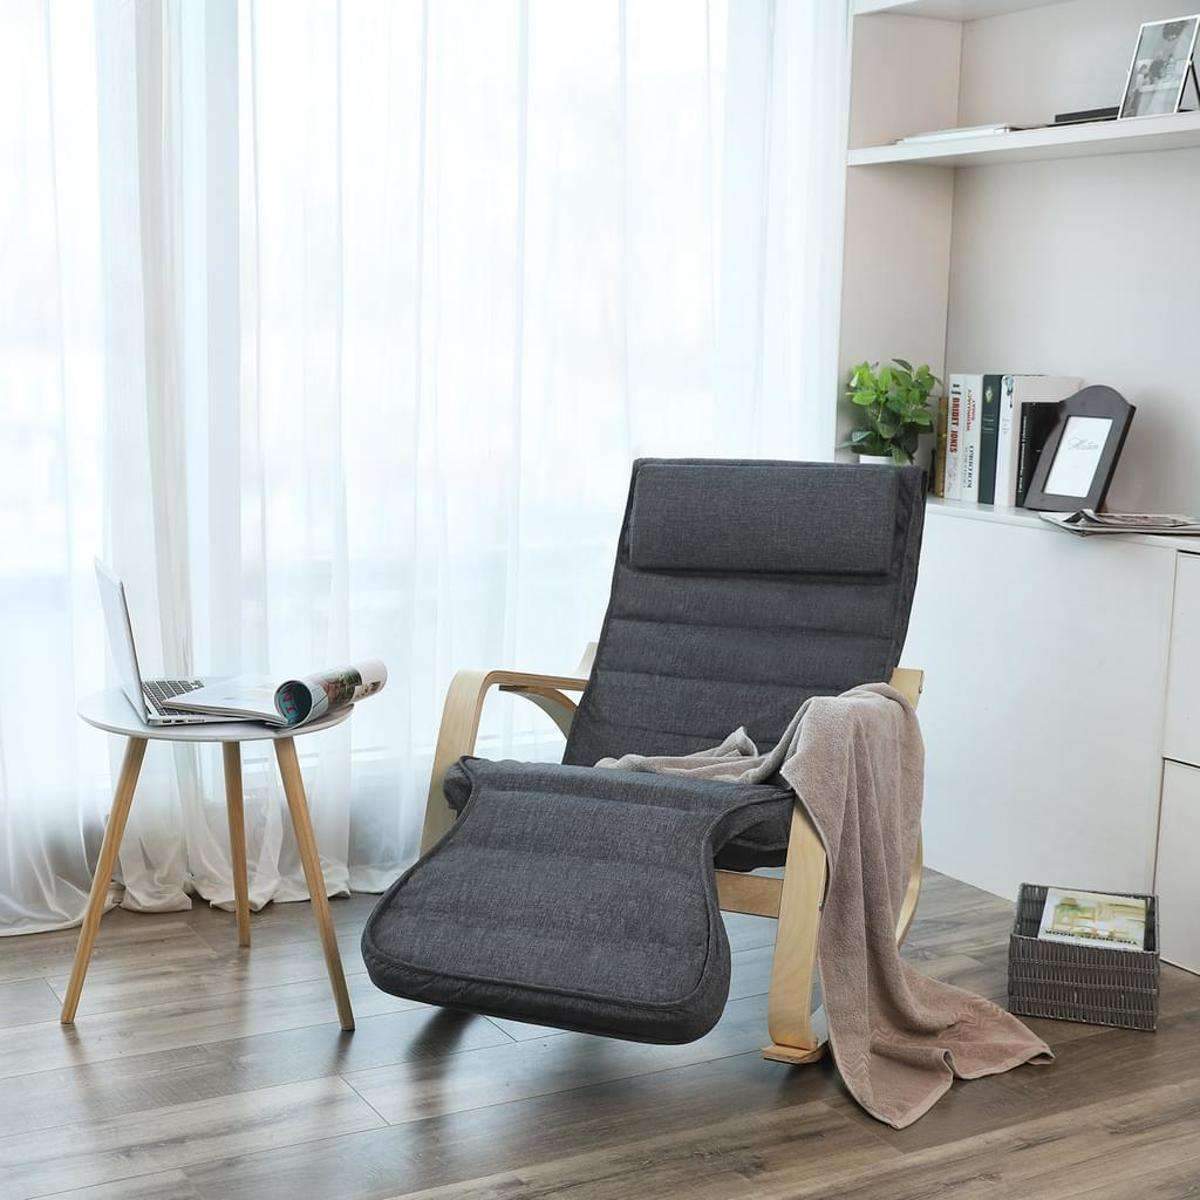 Nancy's Rocking Chair - Relaxing Chair - Relax Chair